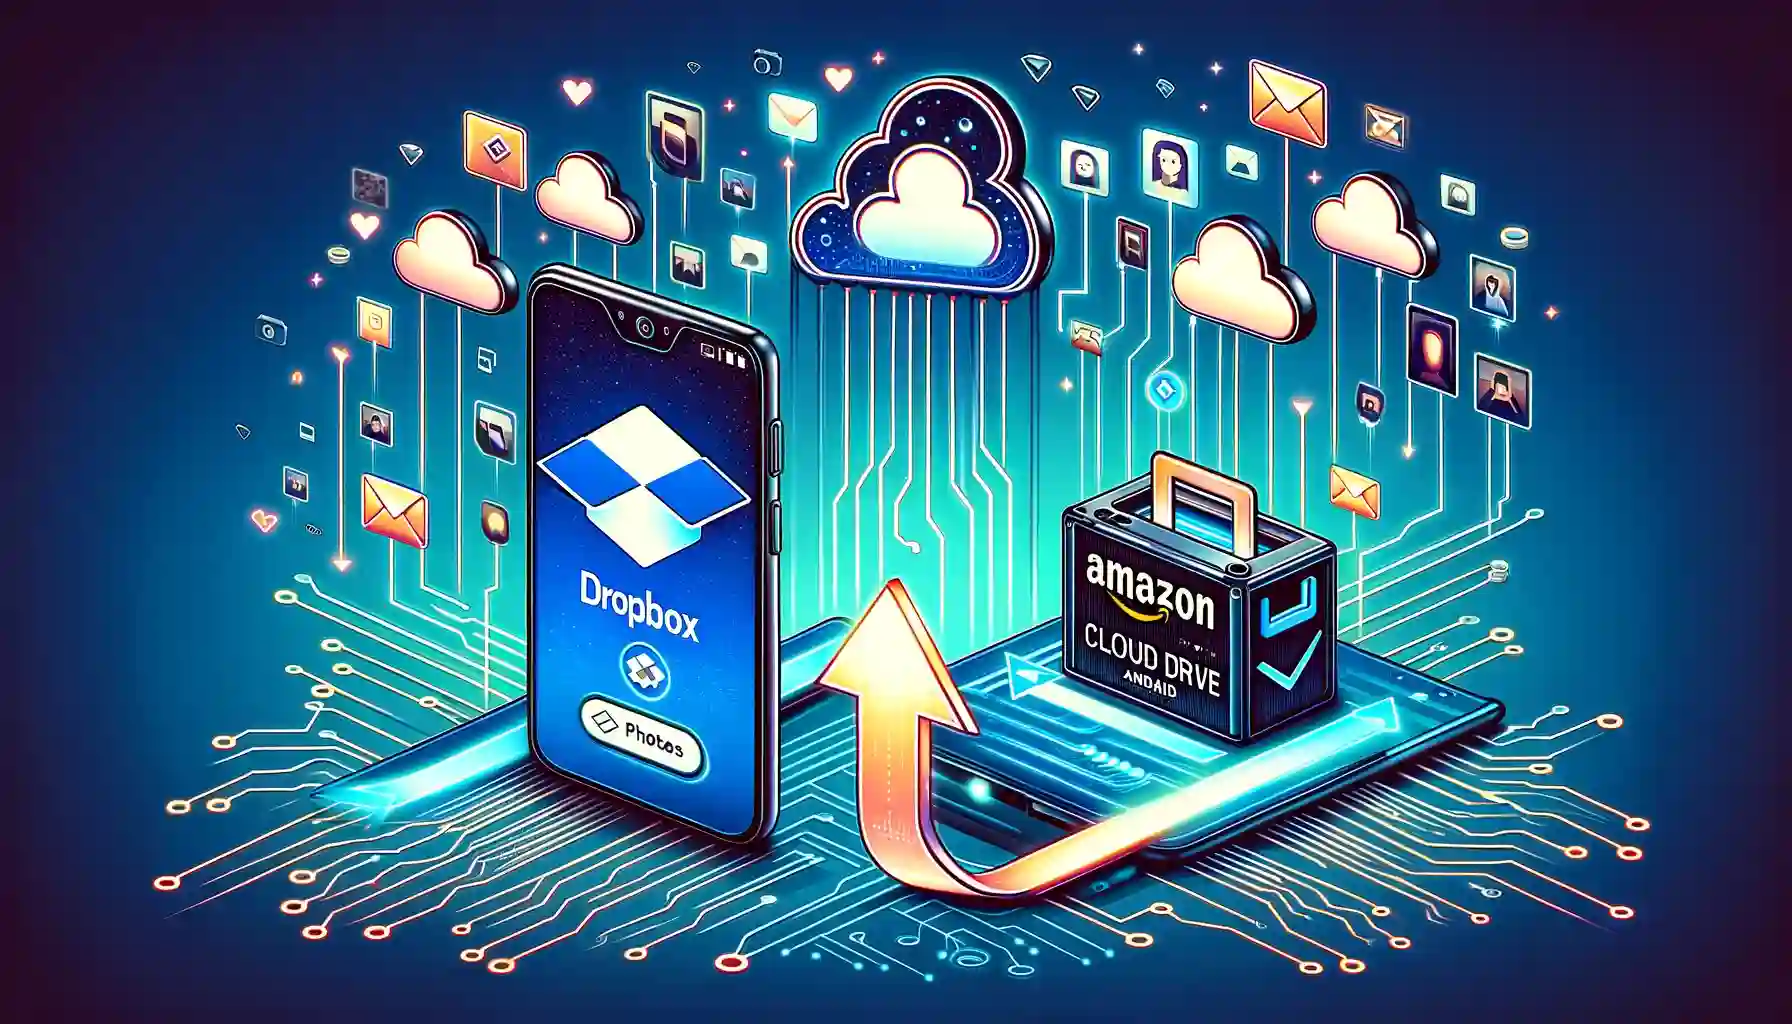 How to Backup Photos from Dropbox to Amazon Cloud Drive on Android